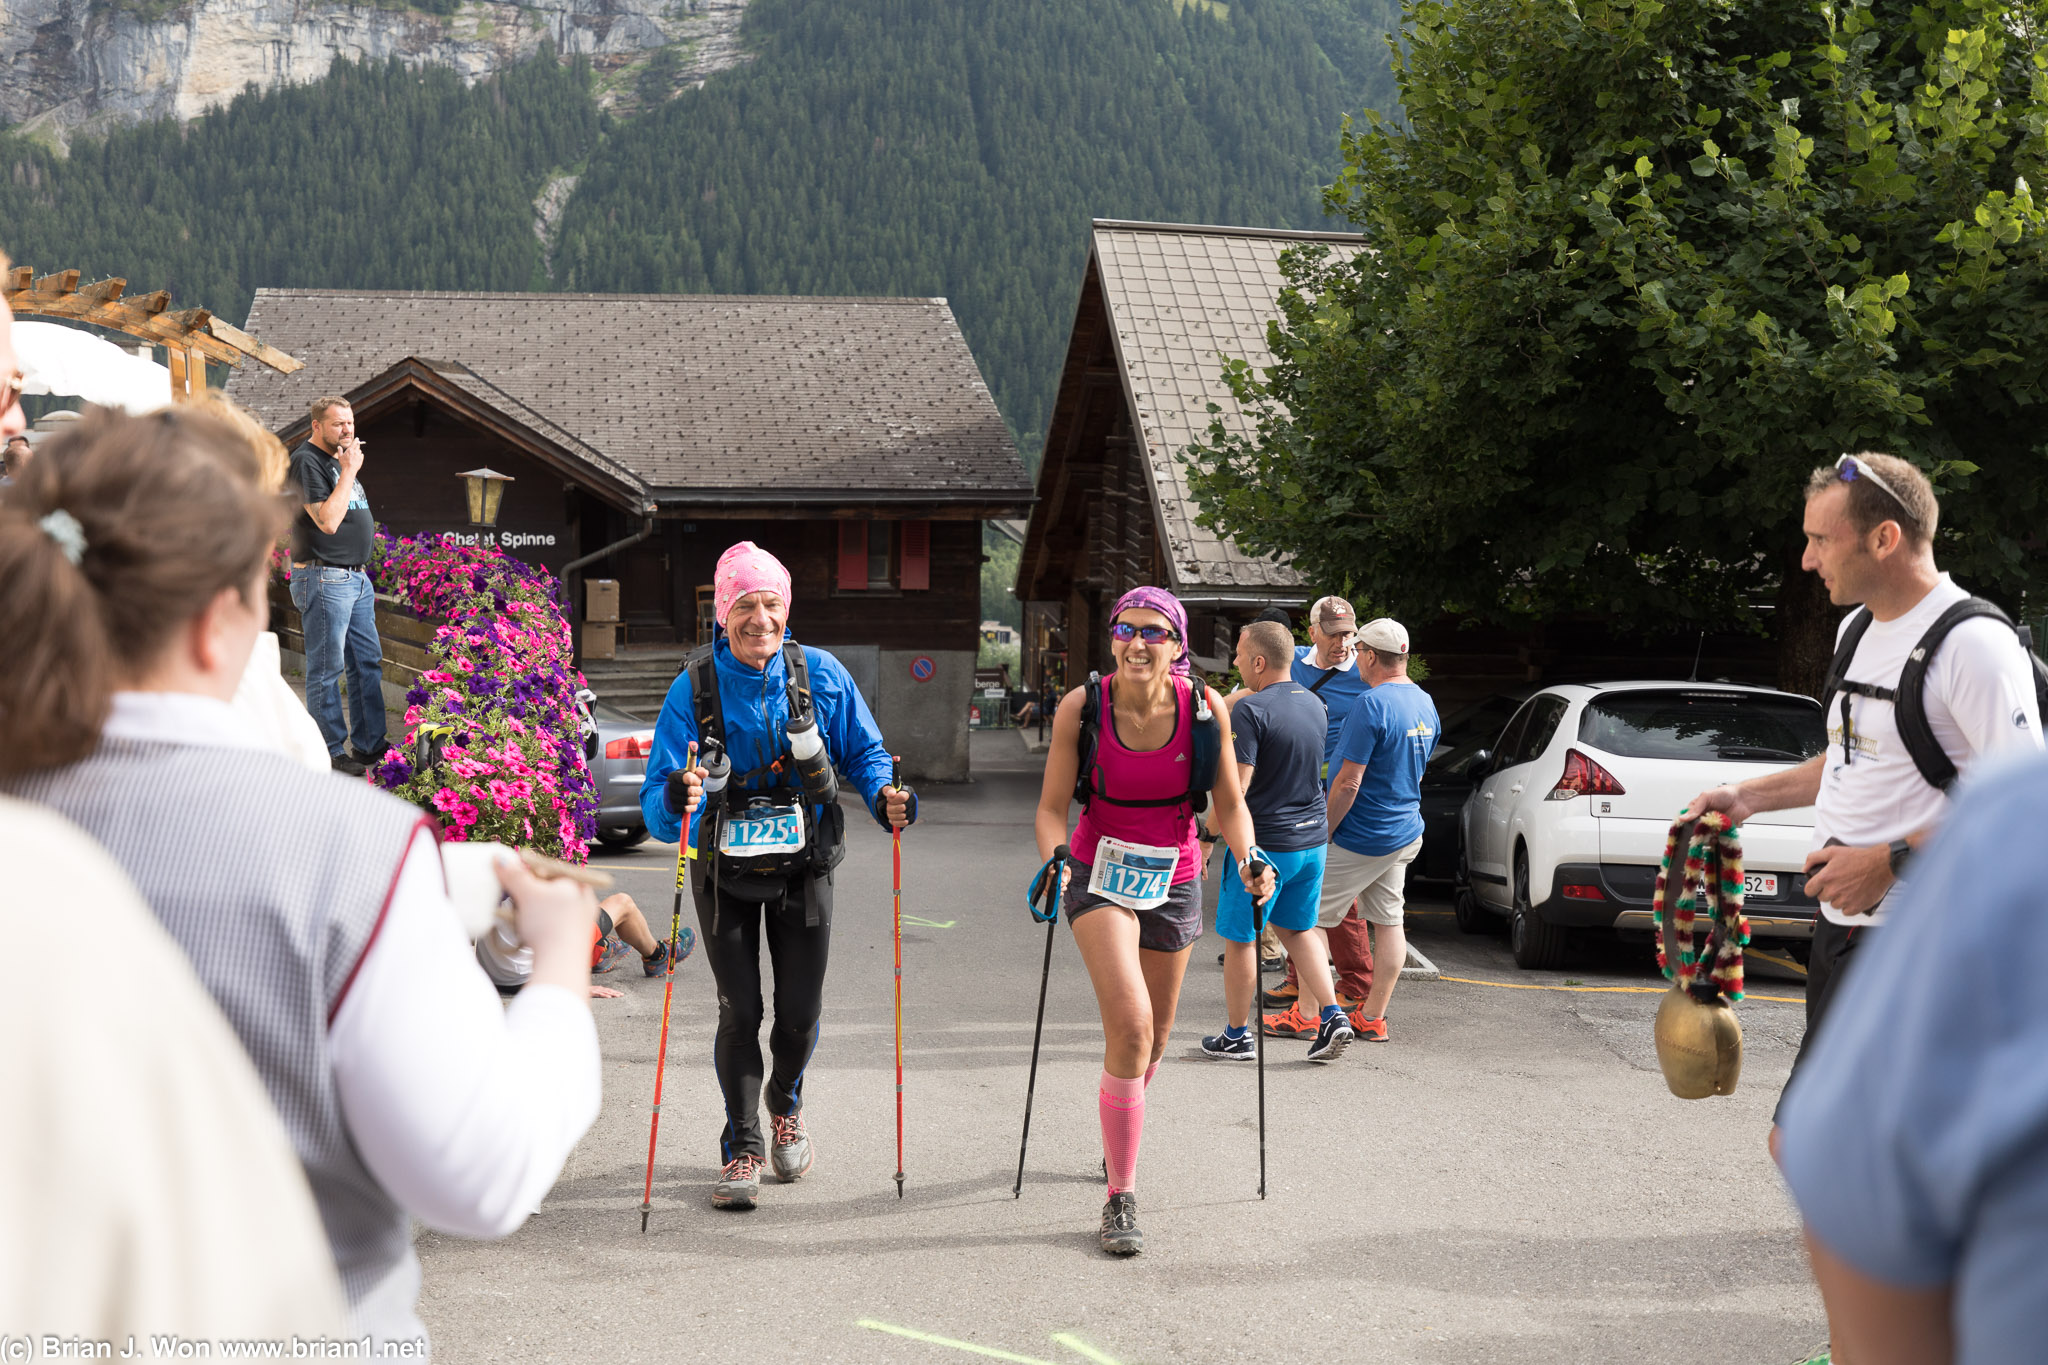 The Eiger Ultra Trail (up to 100km!) was just finishing as we arrived.